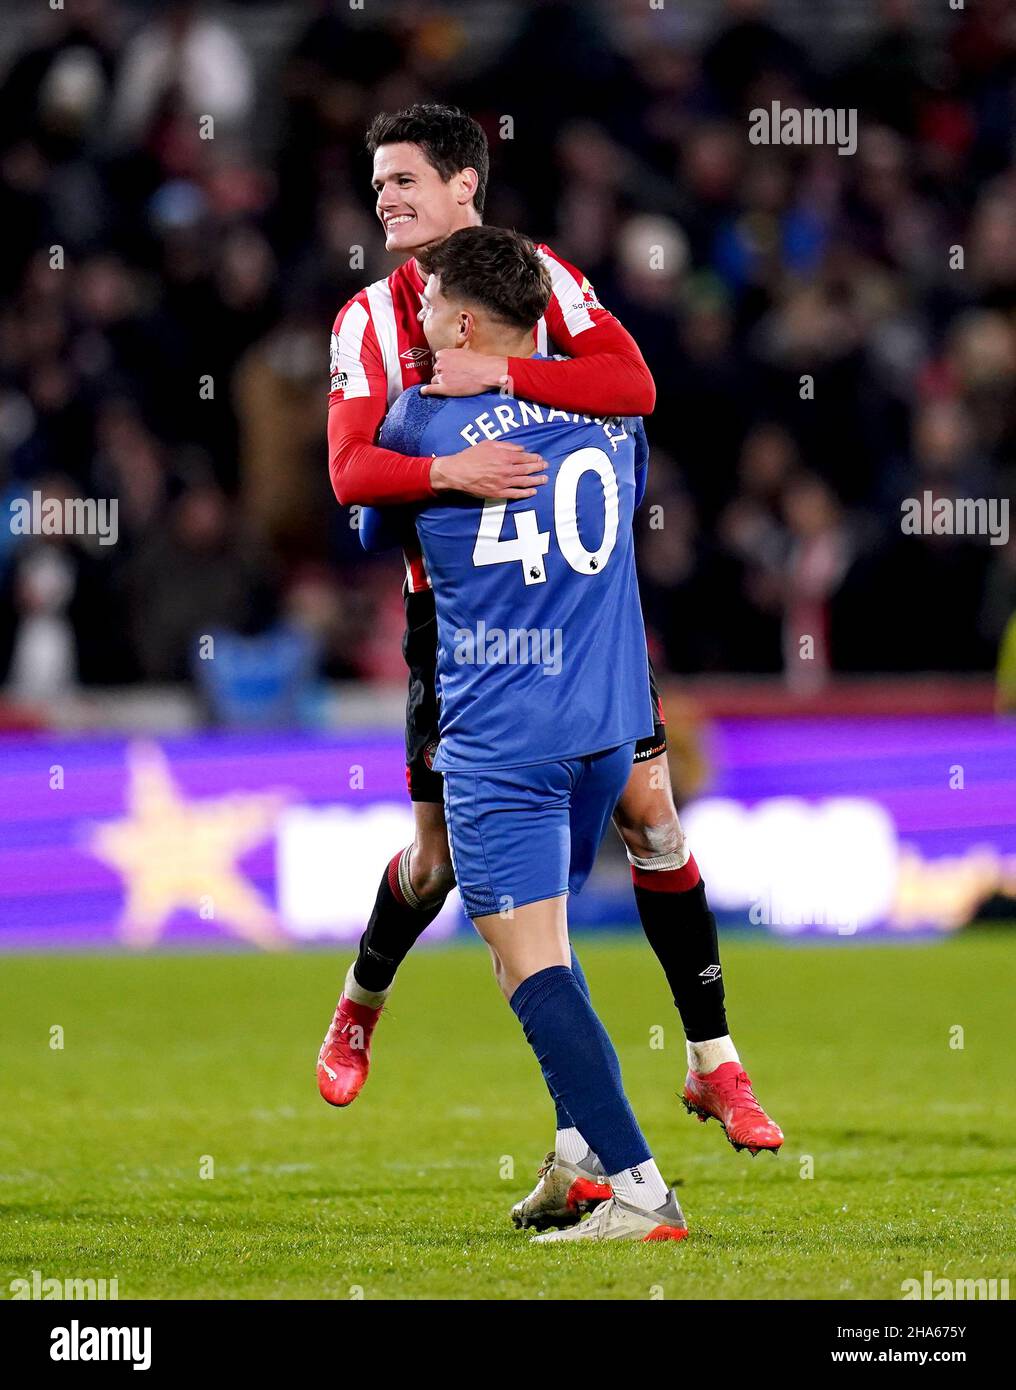 Brentford goalkeeper Alvaro Fernandez (right) celebrates with team-mate Christian Norgaard at the end of the Premier League match at the Brentford Community Stadium, London. Picture date: Friday December 10, 2021. Stock Photo